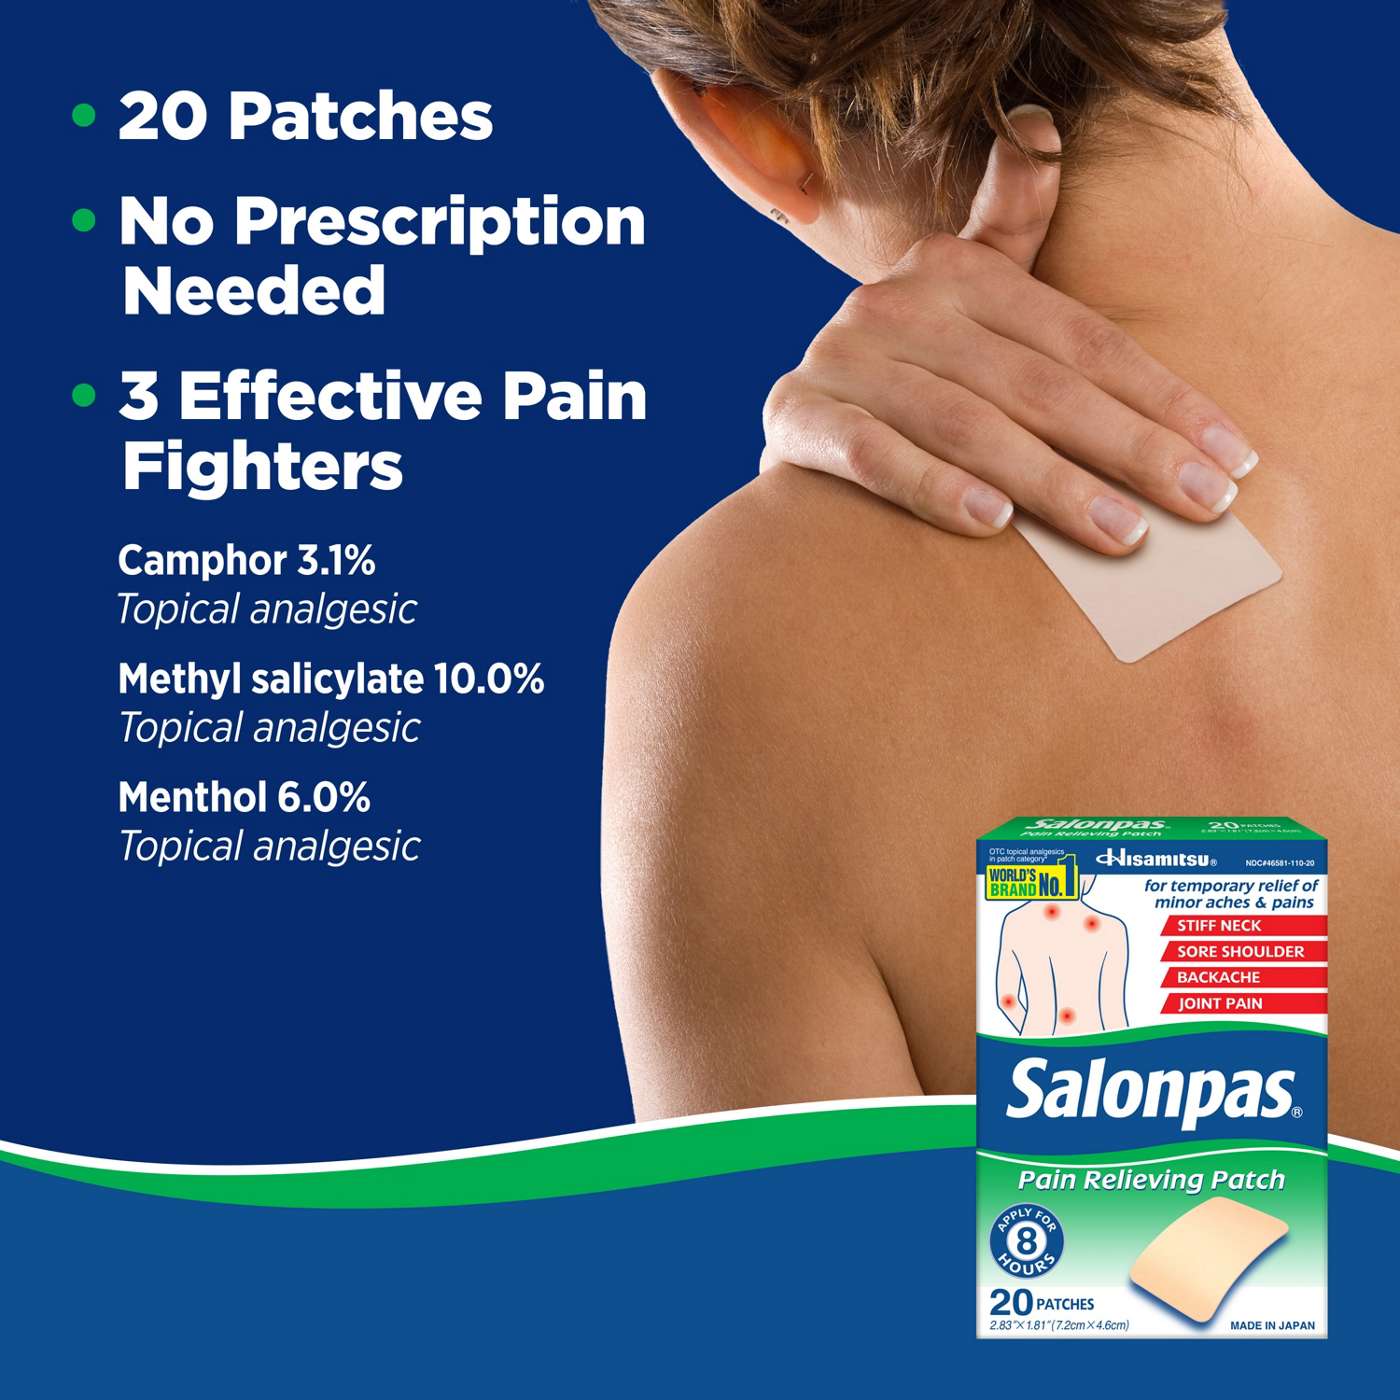 Salonpas Pain Relieving Patch; image 4 of 5